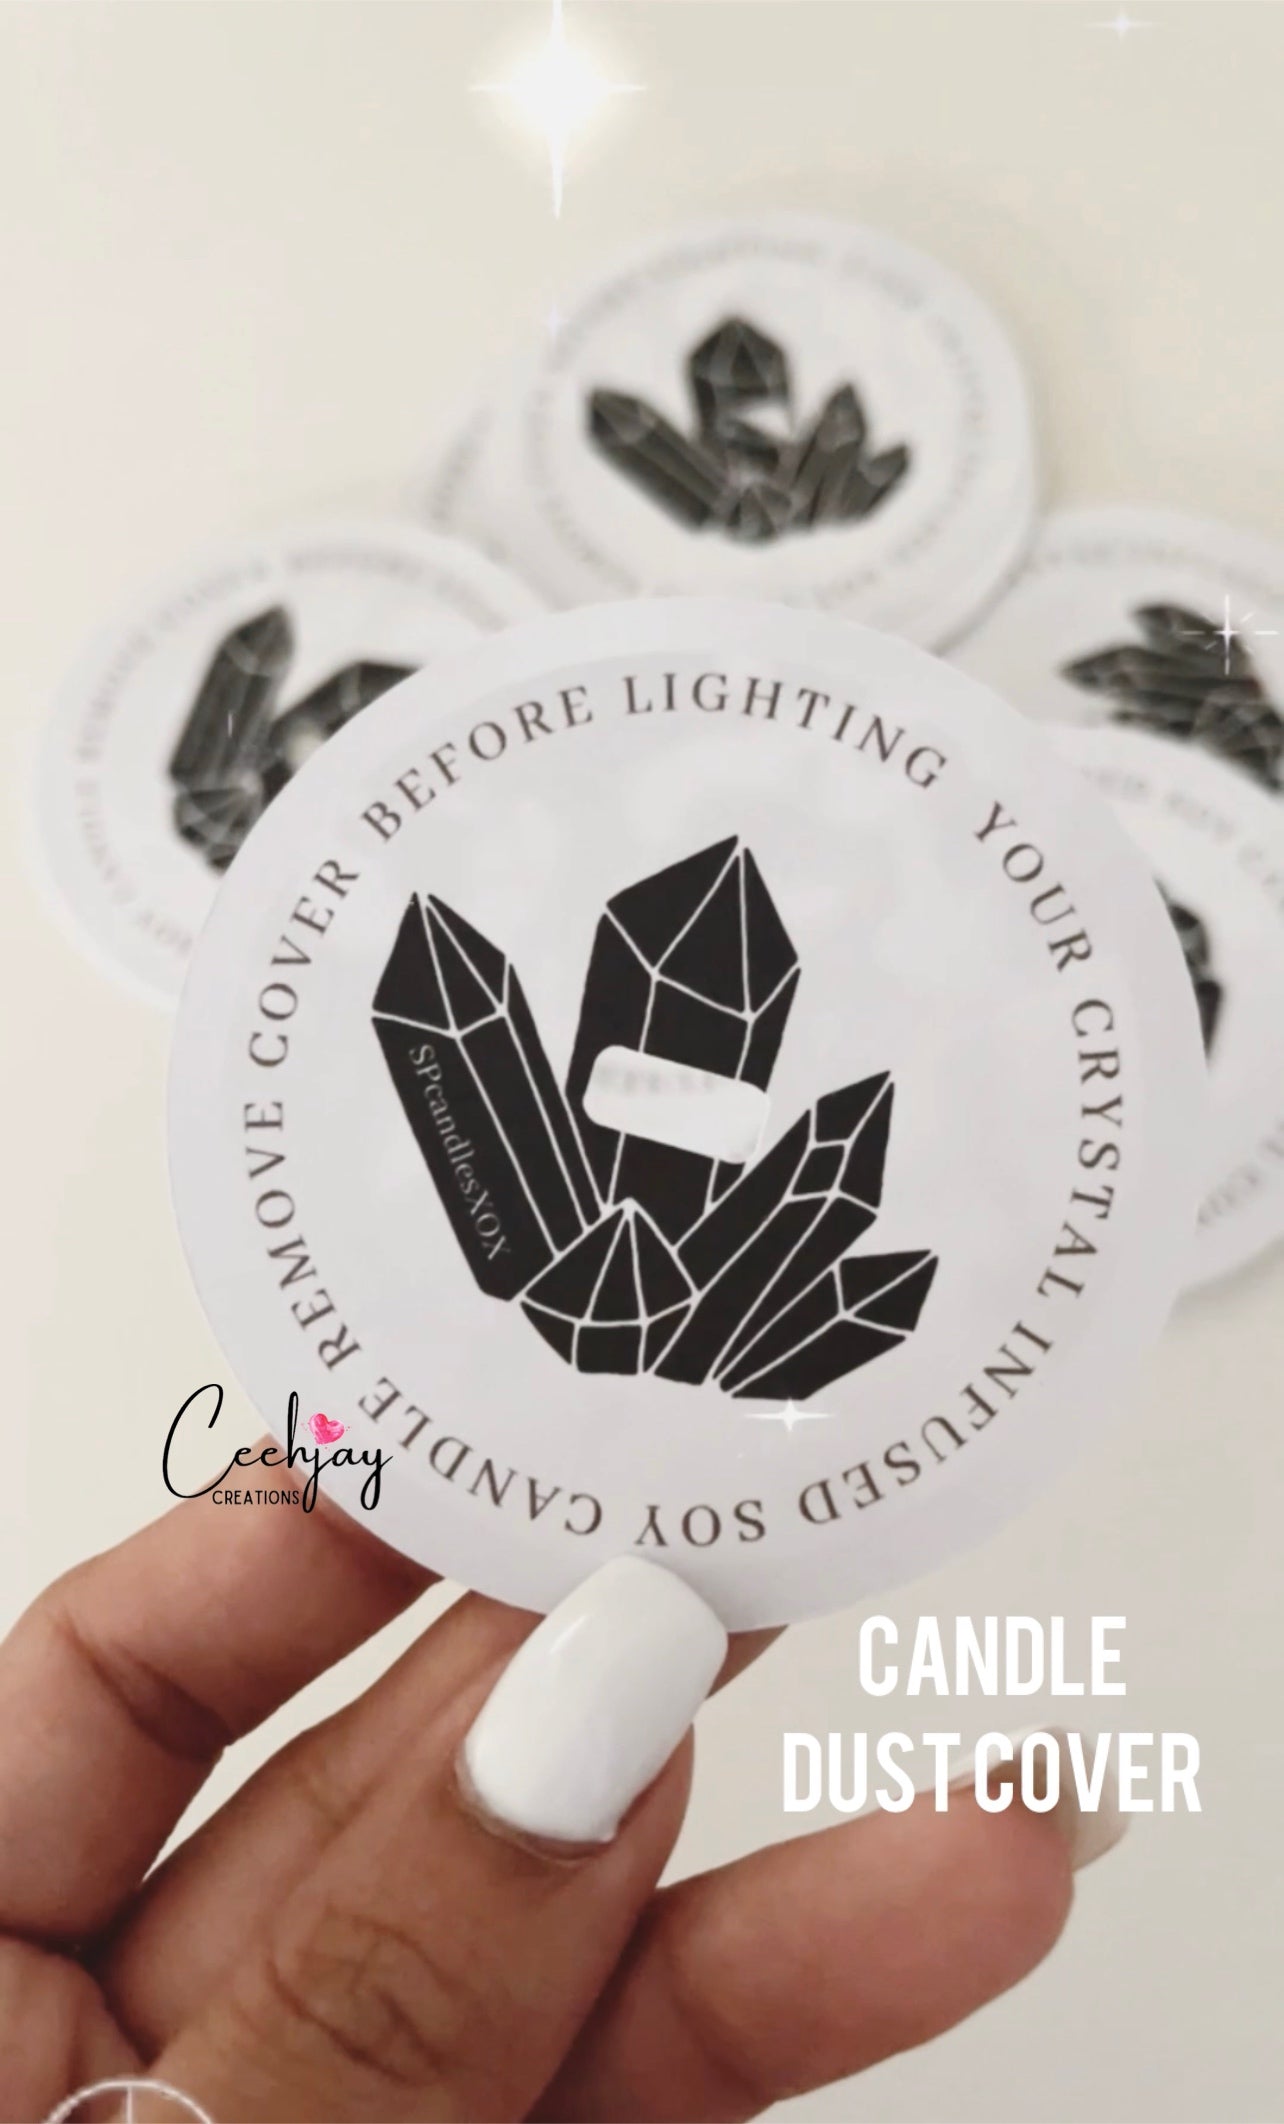 Use our Candle Dust Cover Templates 